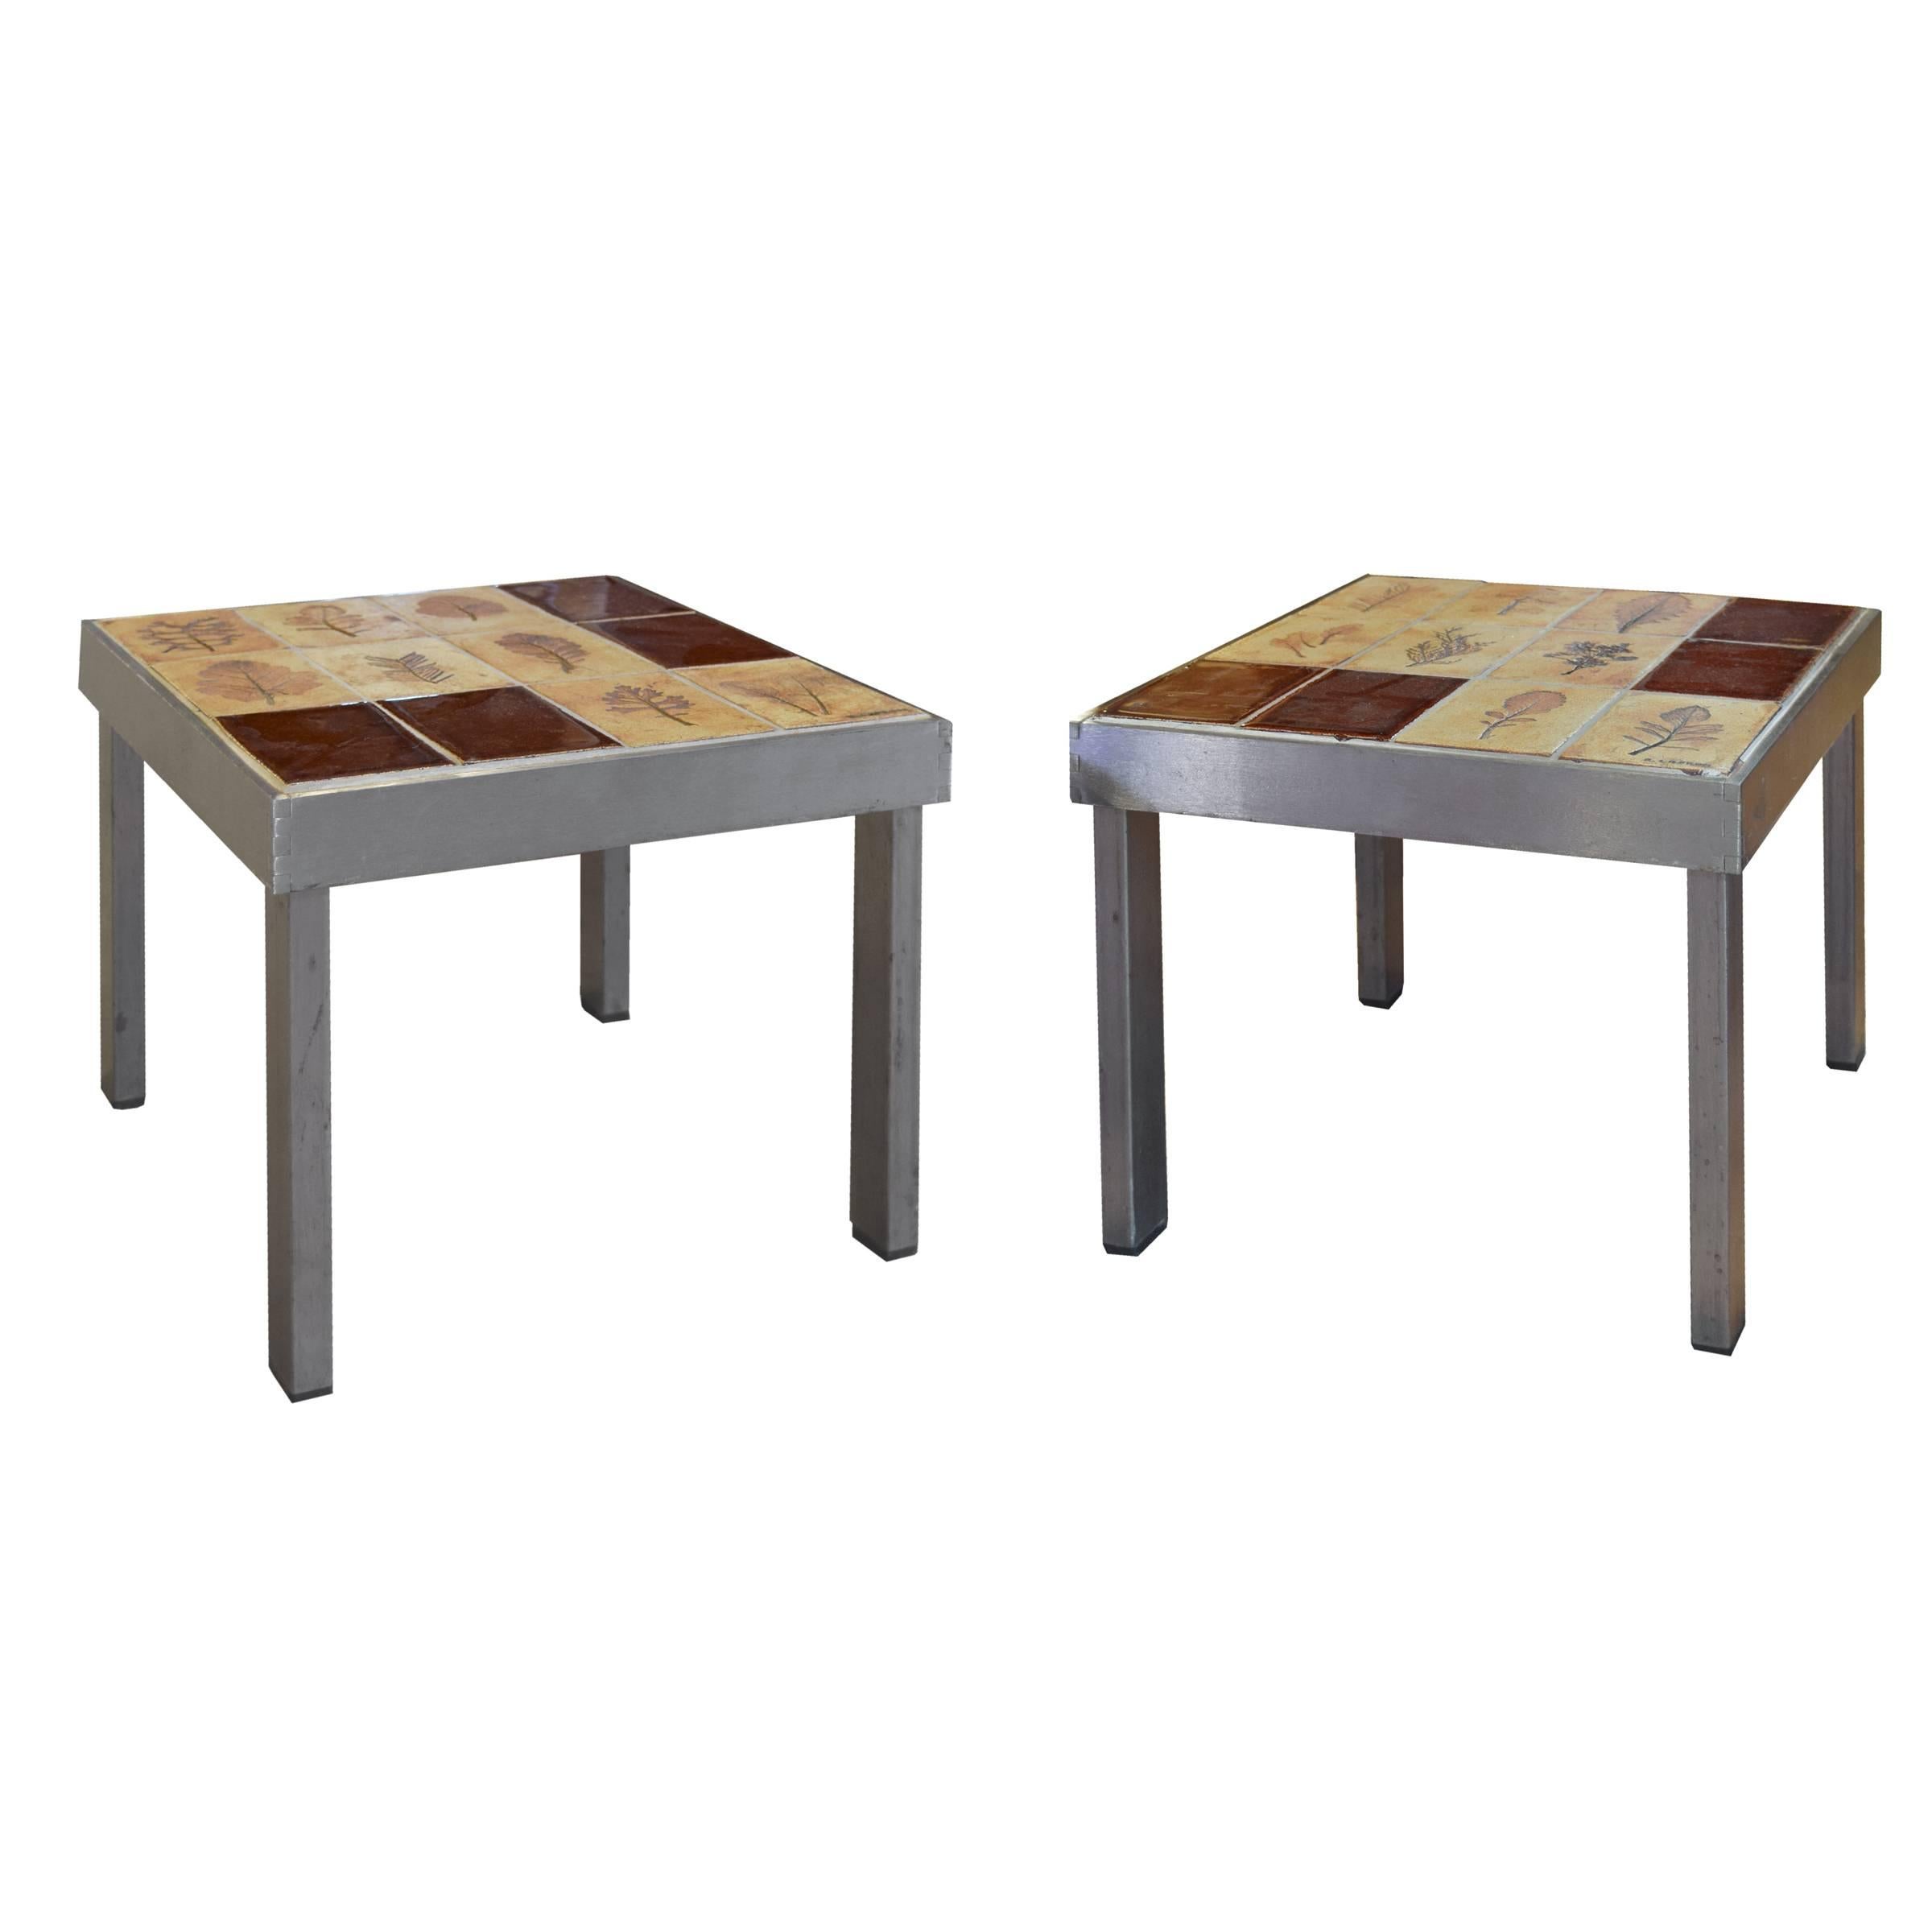 Pair of French Midcentury Steel and Tile Tables by Roger Capron